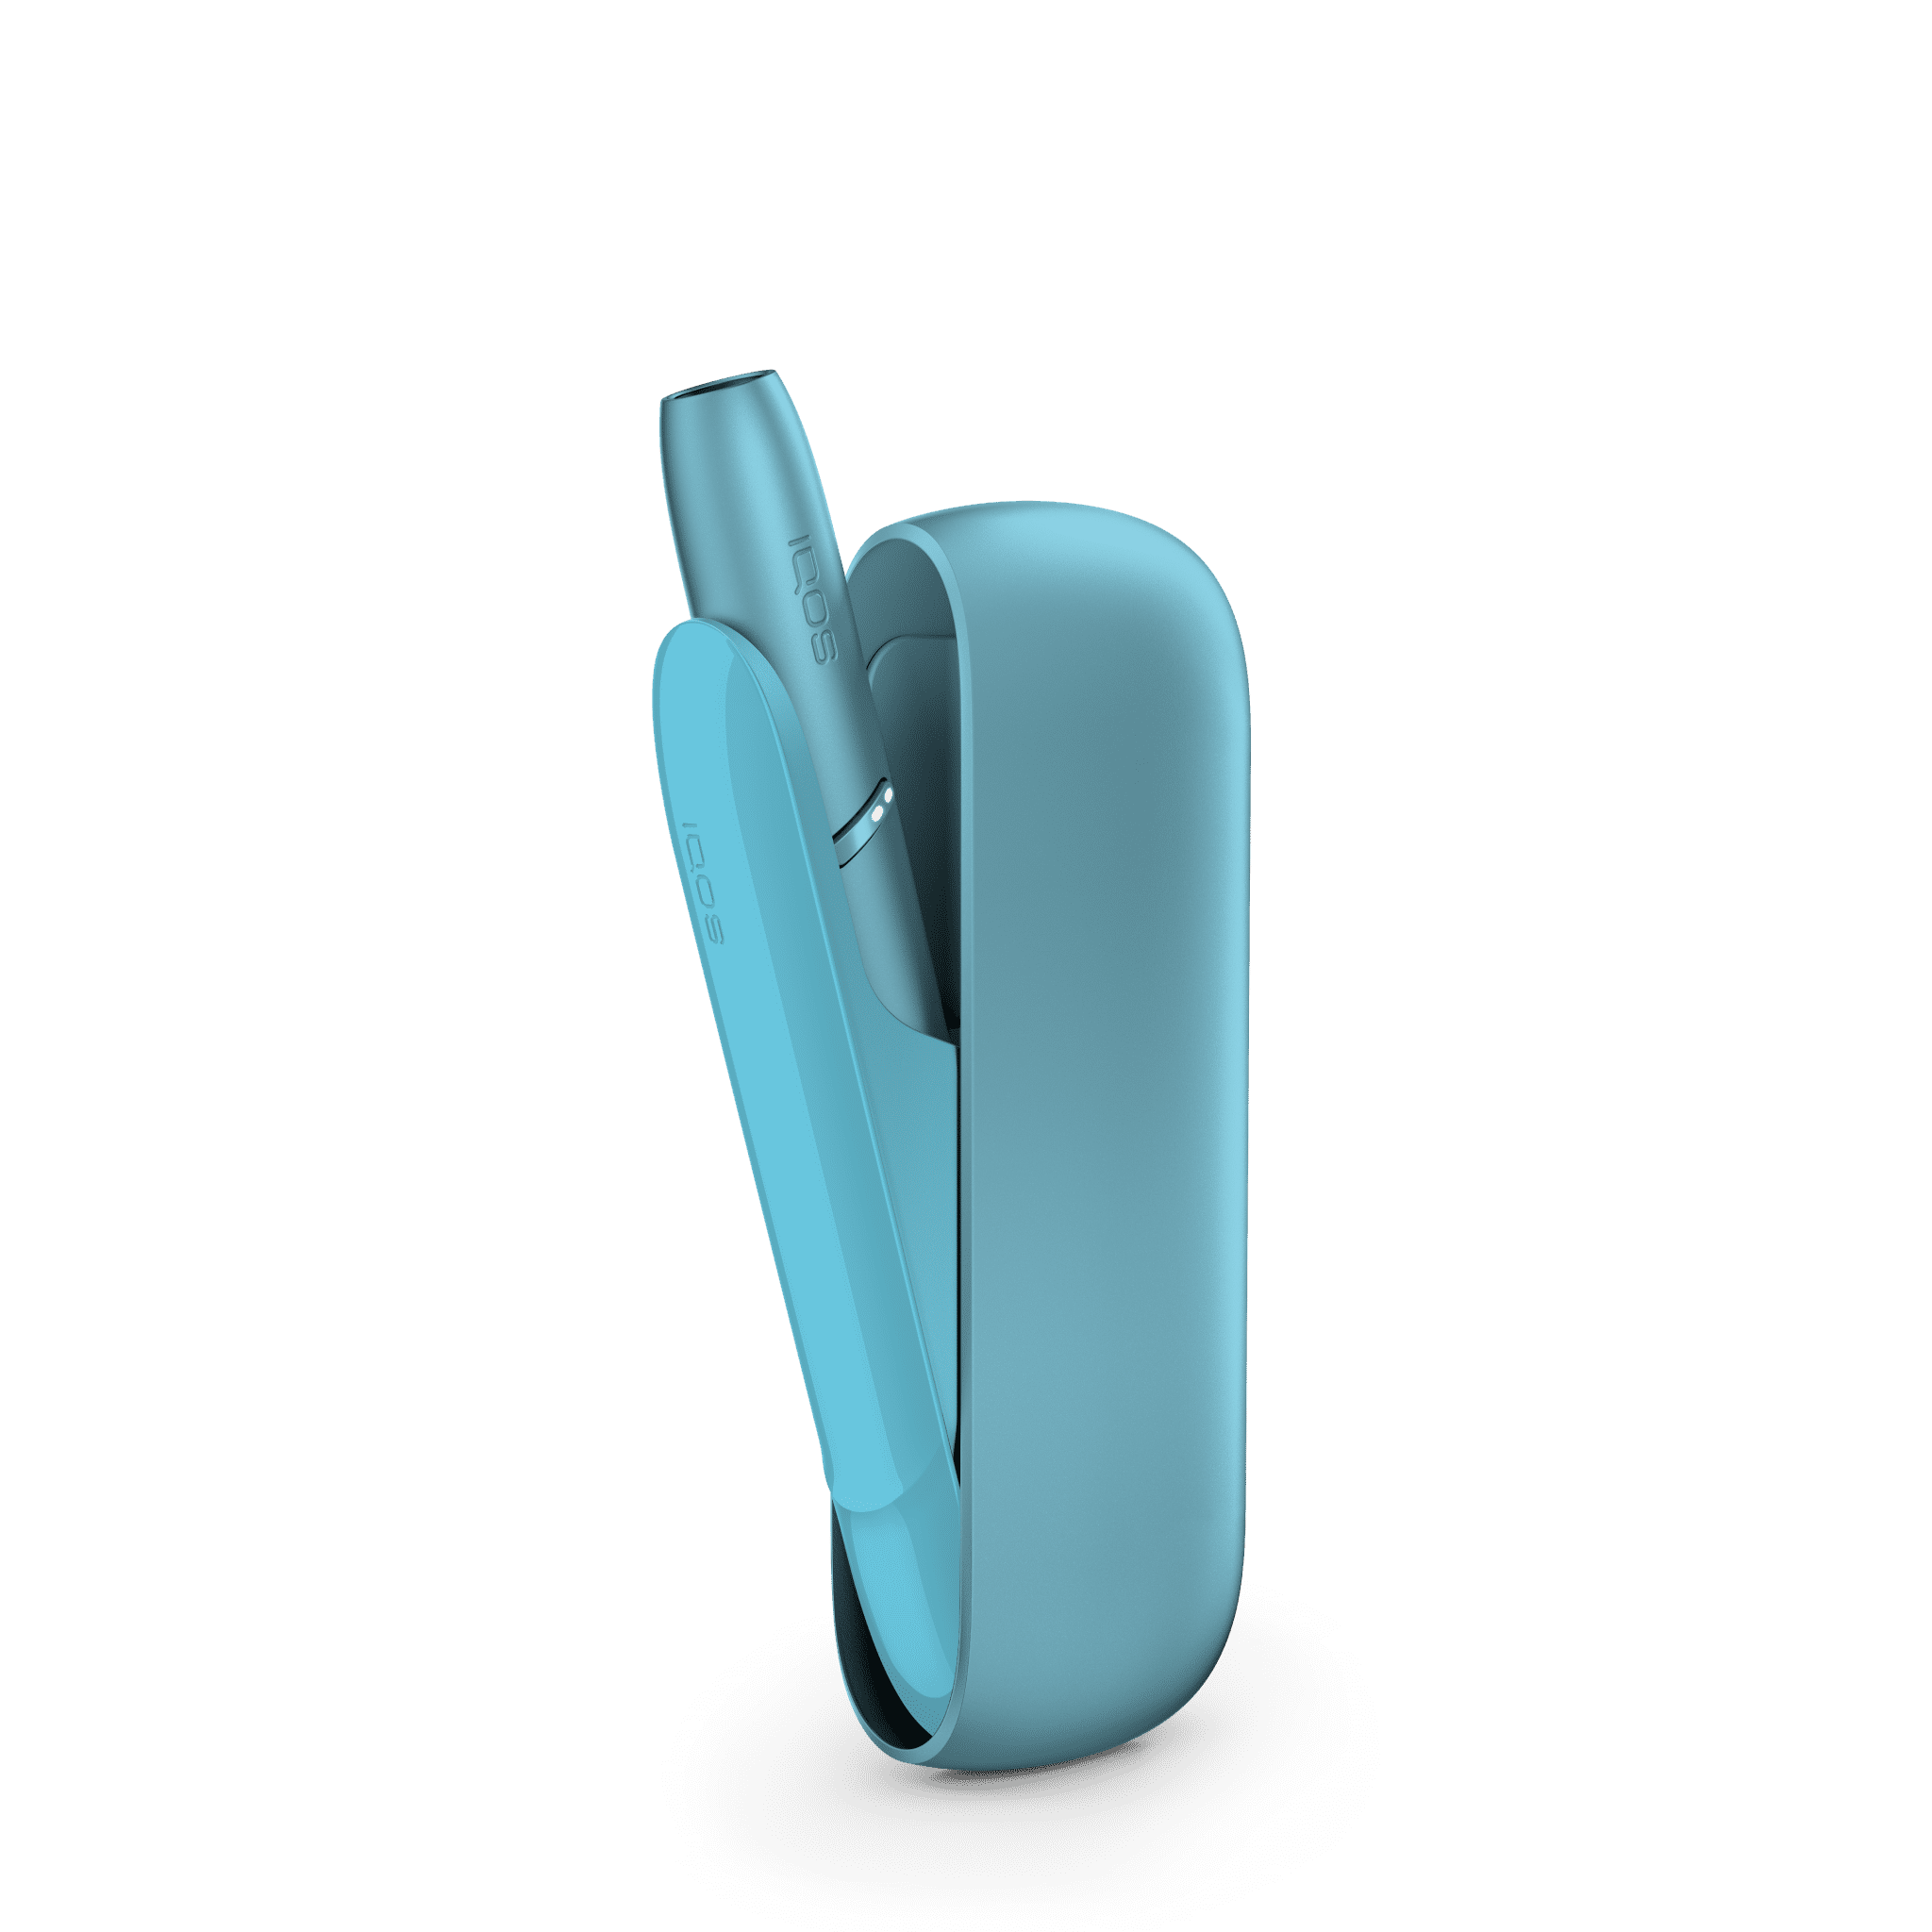 /IQOS%20Originals%20Duo%20heated%20tobacco%20device%20%28holder%20and%20pocket%20charger%29%20in%20turquoise%20color.